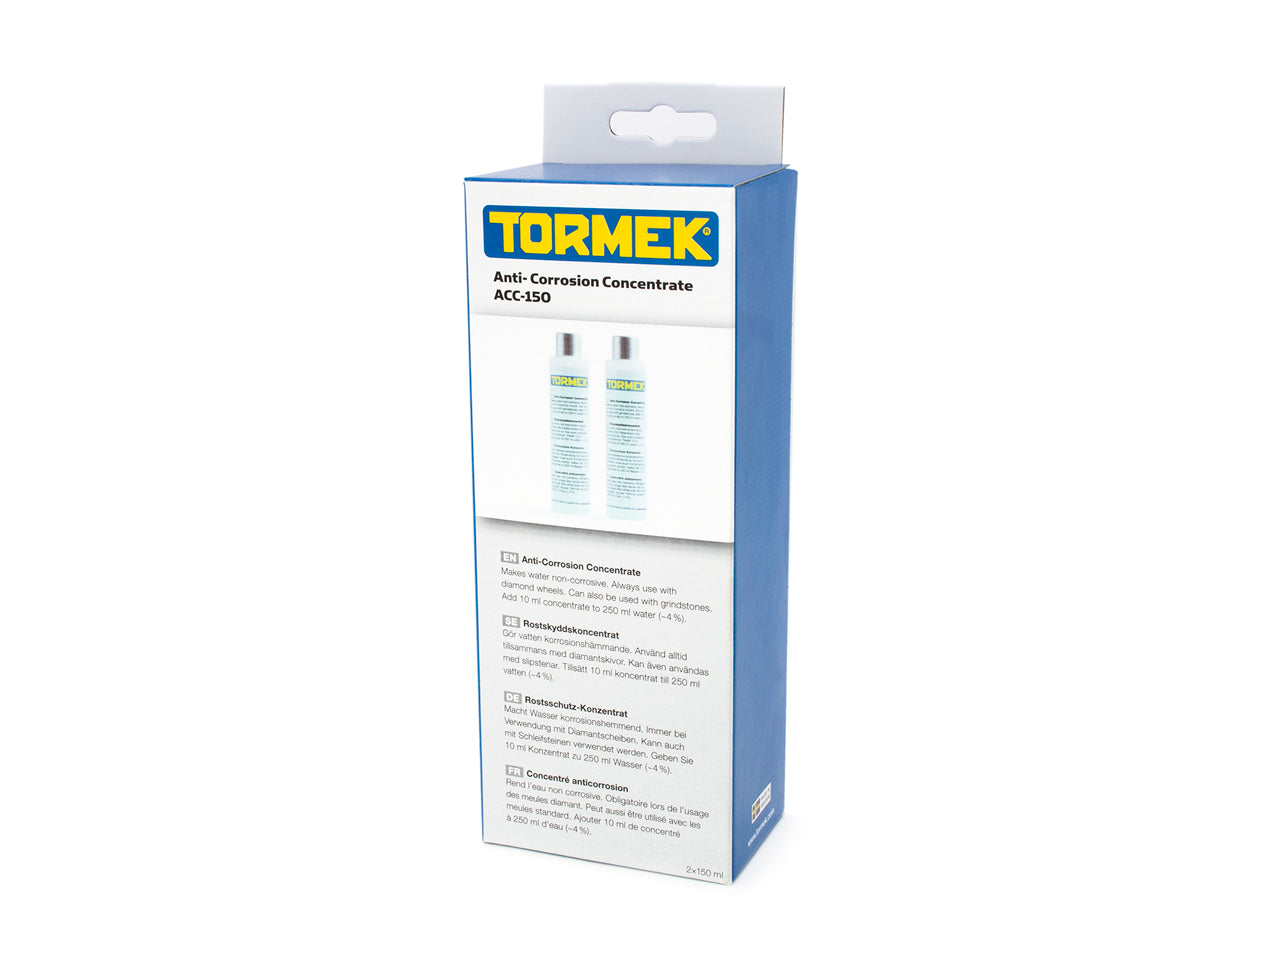 Tormek Anti-Corrosion Concentrate - Axeman.ca